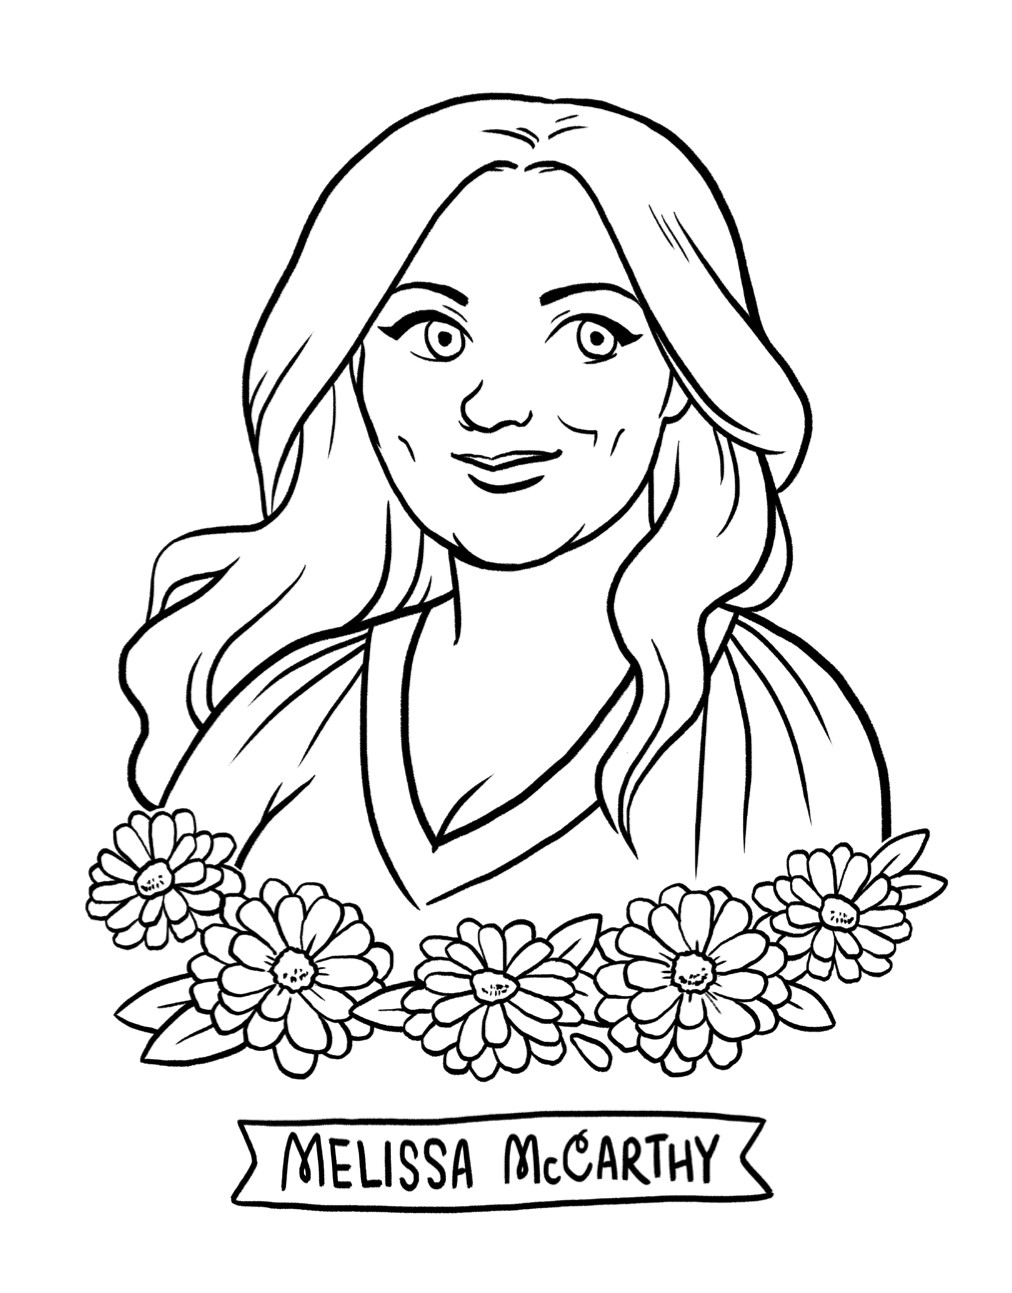 Gilmore Girls Coloring Pages
 Eat Drink Do Your GILMORE GIRLS Binge Workman Publishing